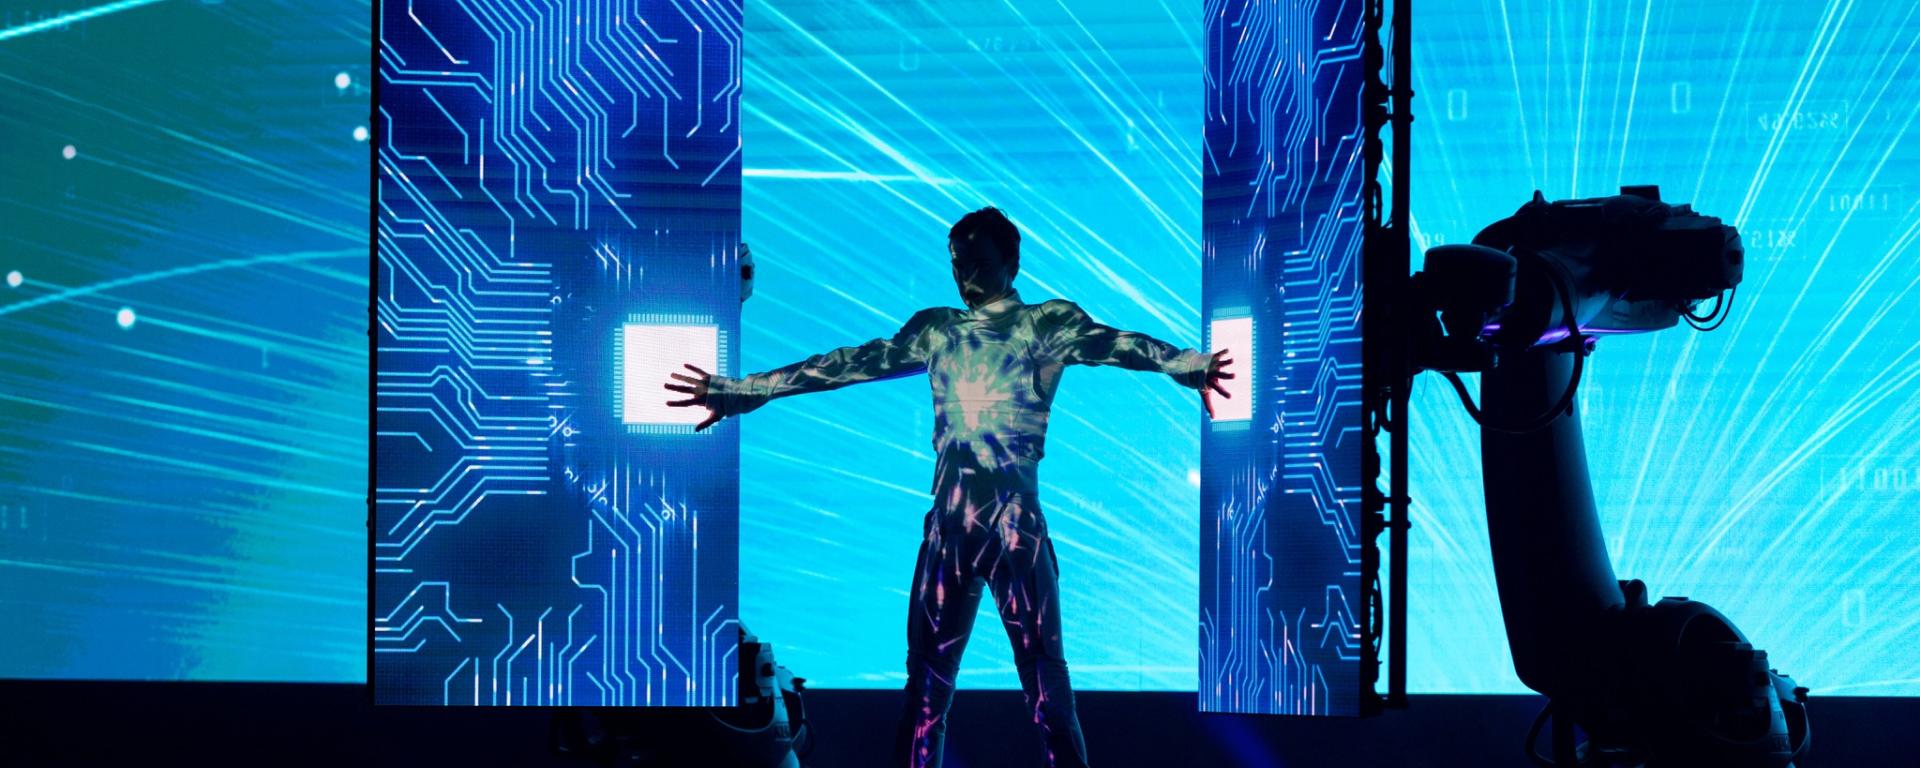 A performer interacts with LED screens during a multimedia performance at the Global AI Summit 2022